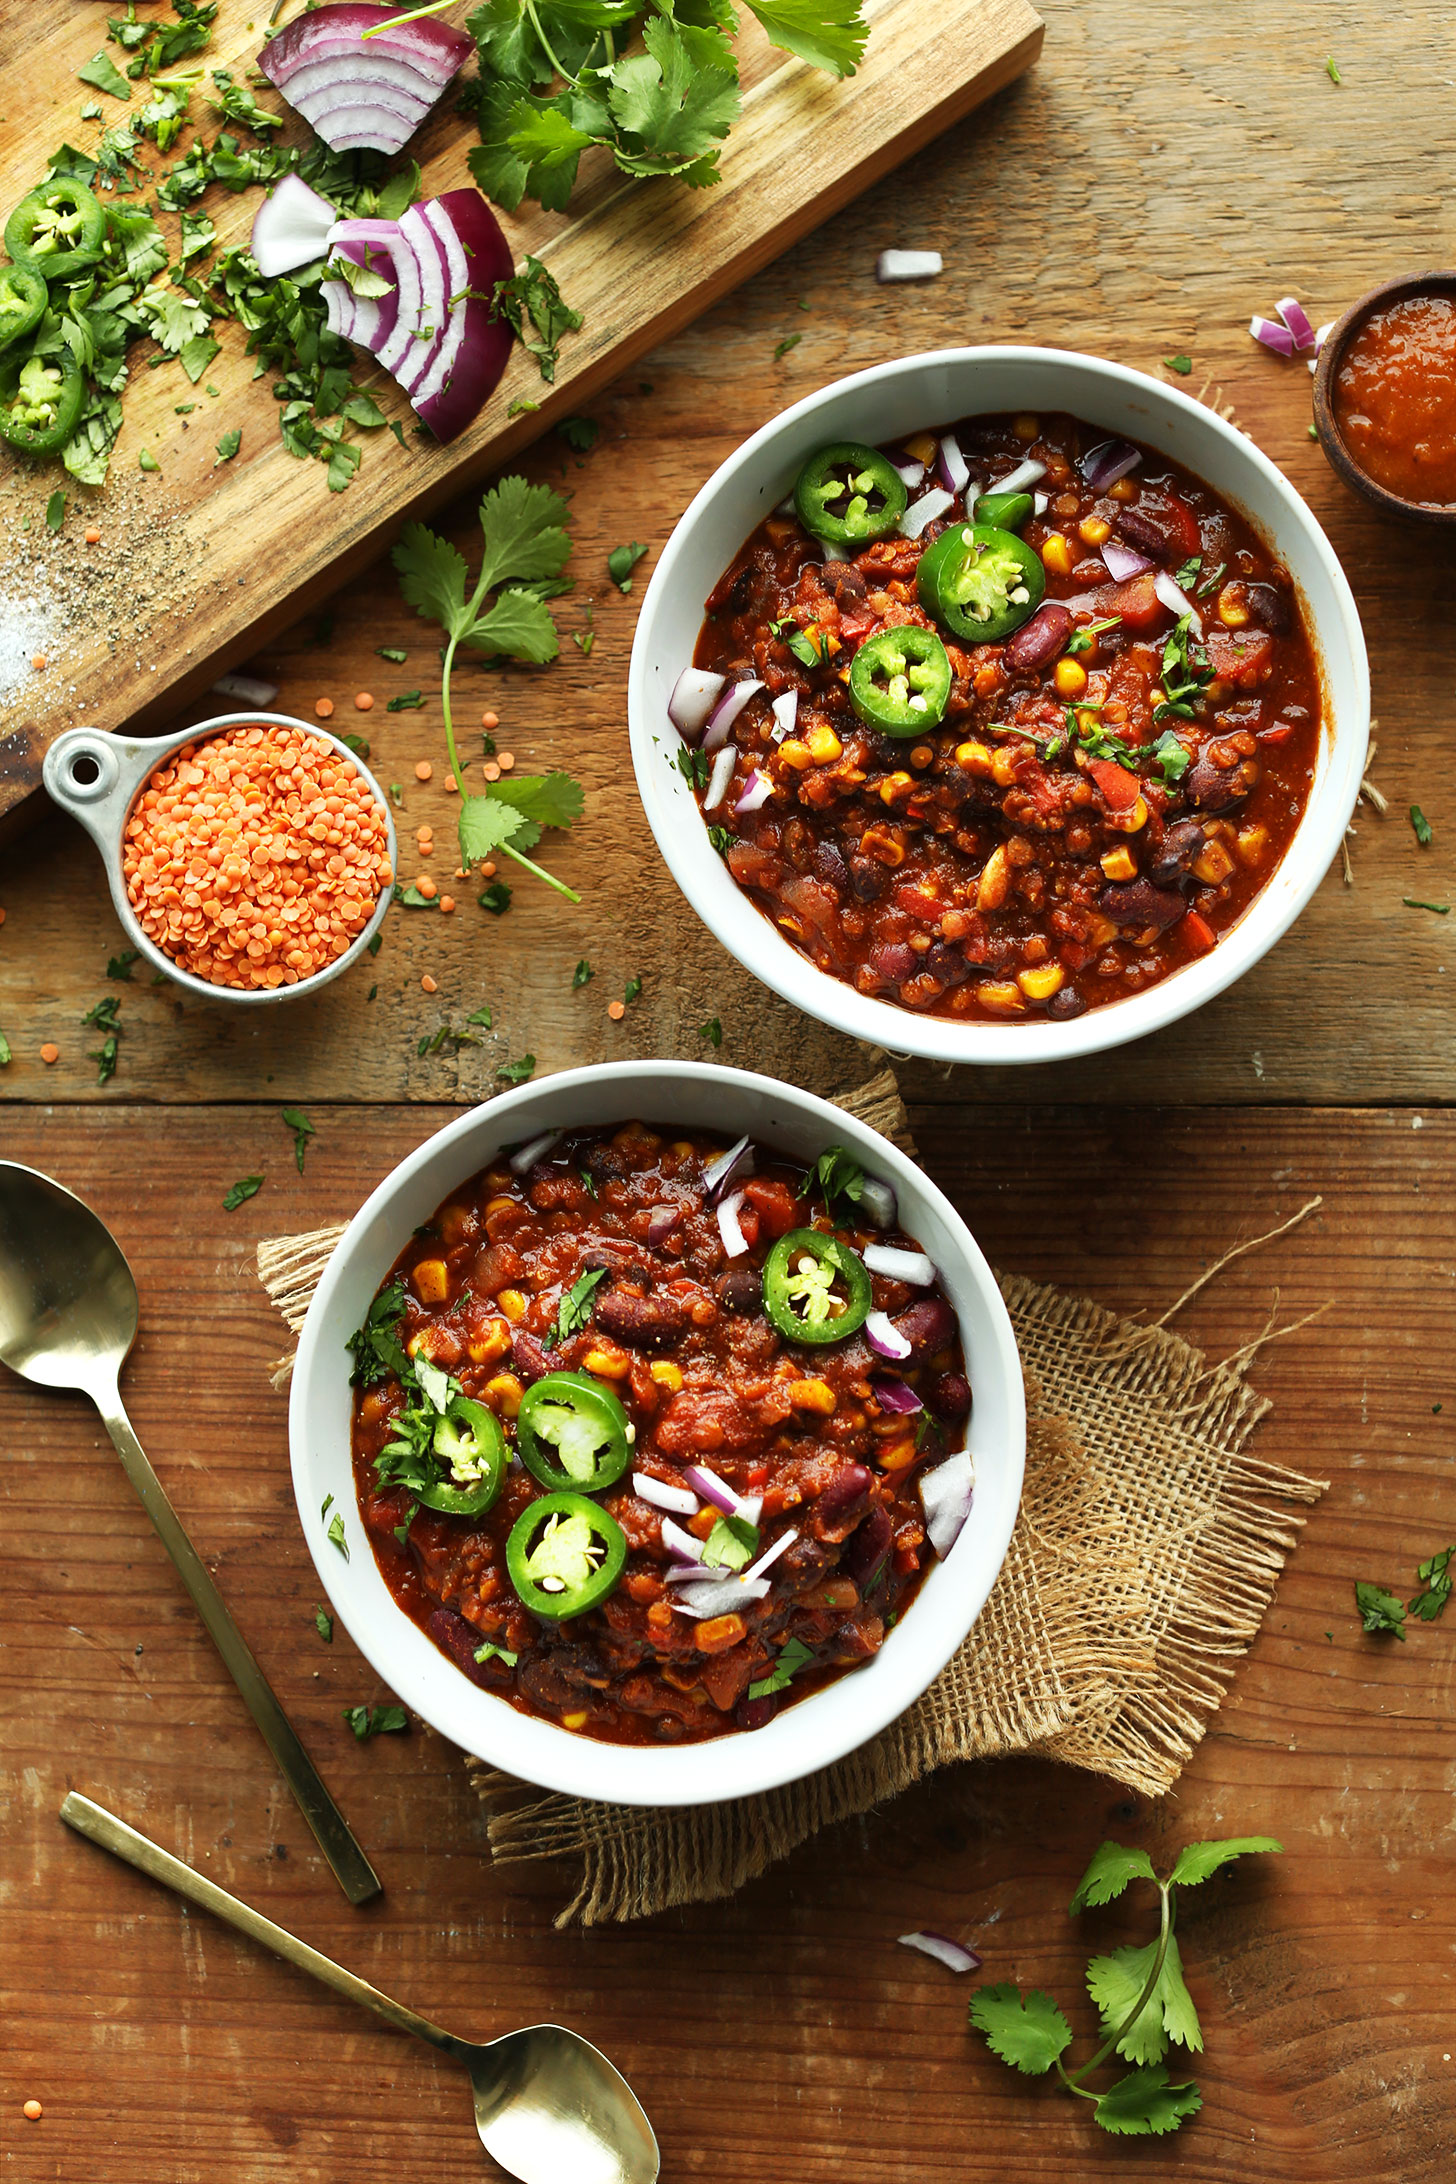 Bowls of Lentil Chili topped with red onion and jalapeño